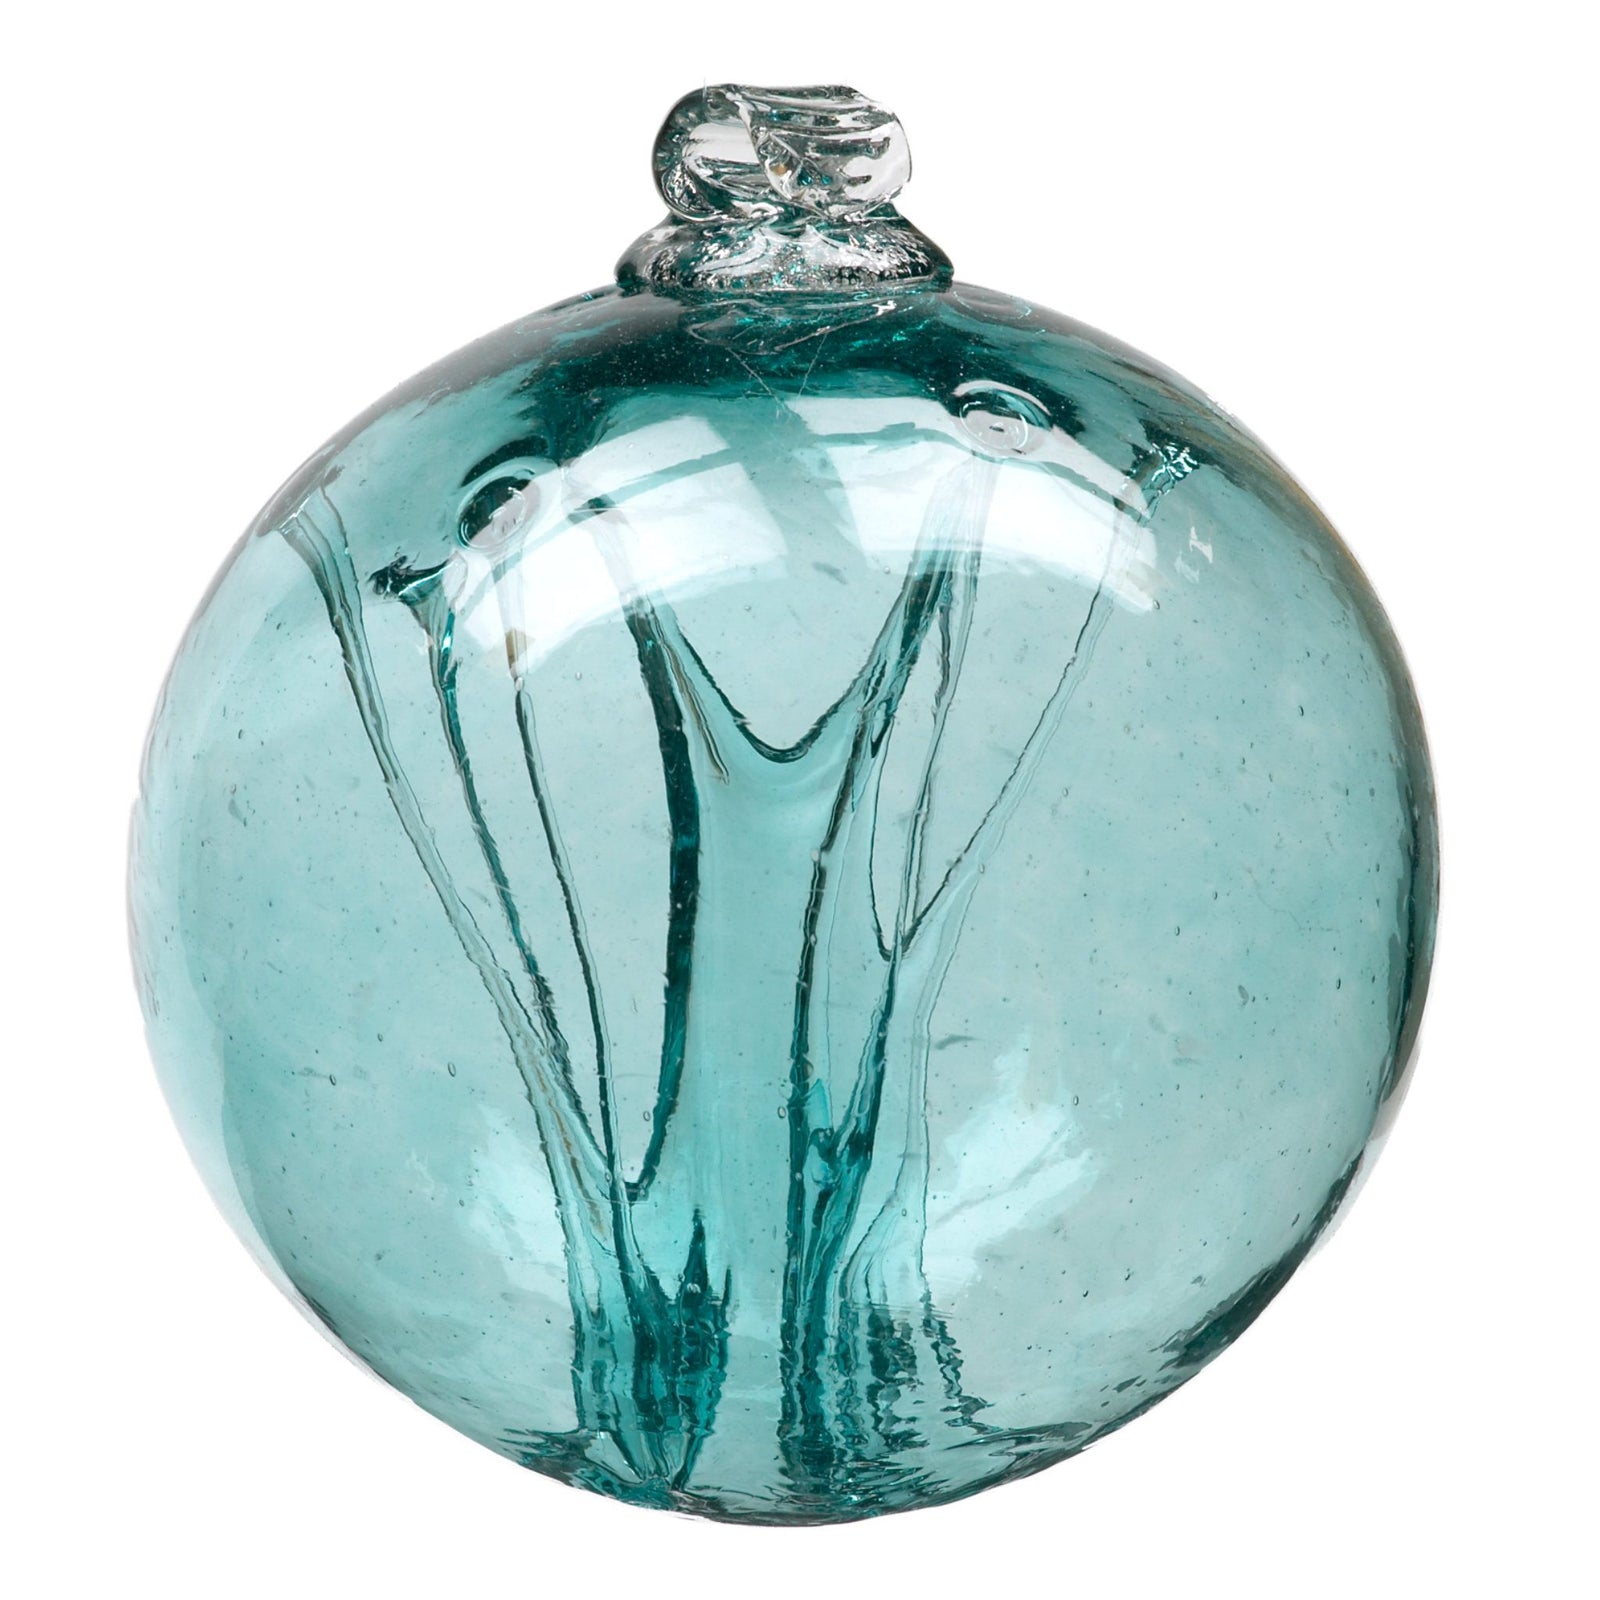 Olde English Witch Ball | Teal hand-blown Art Glass Ornament